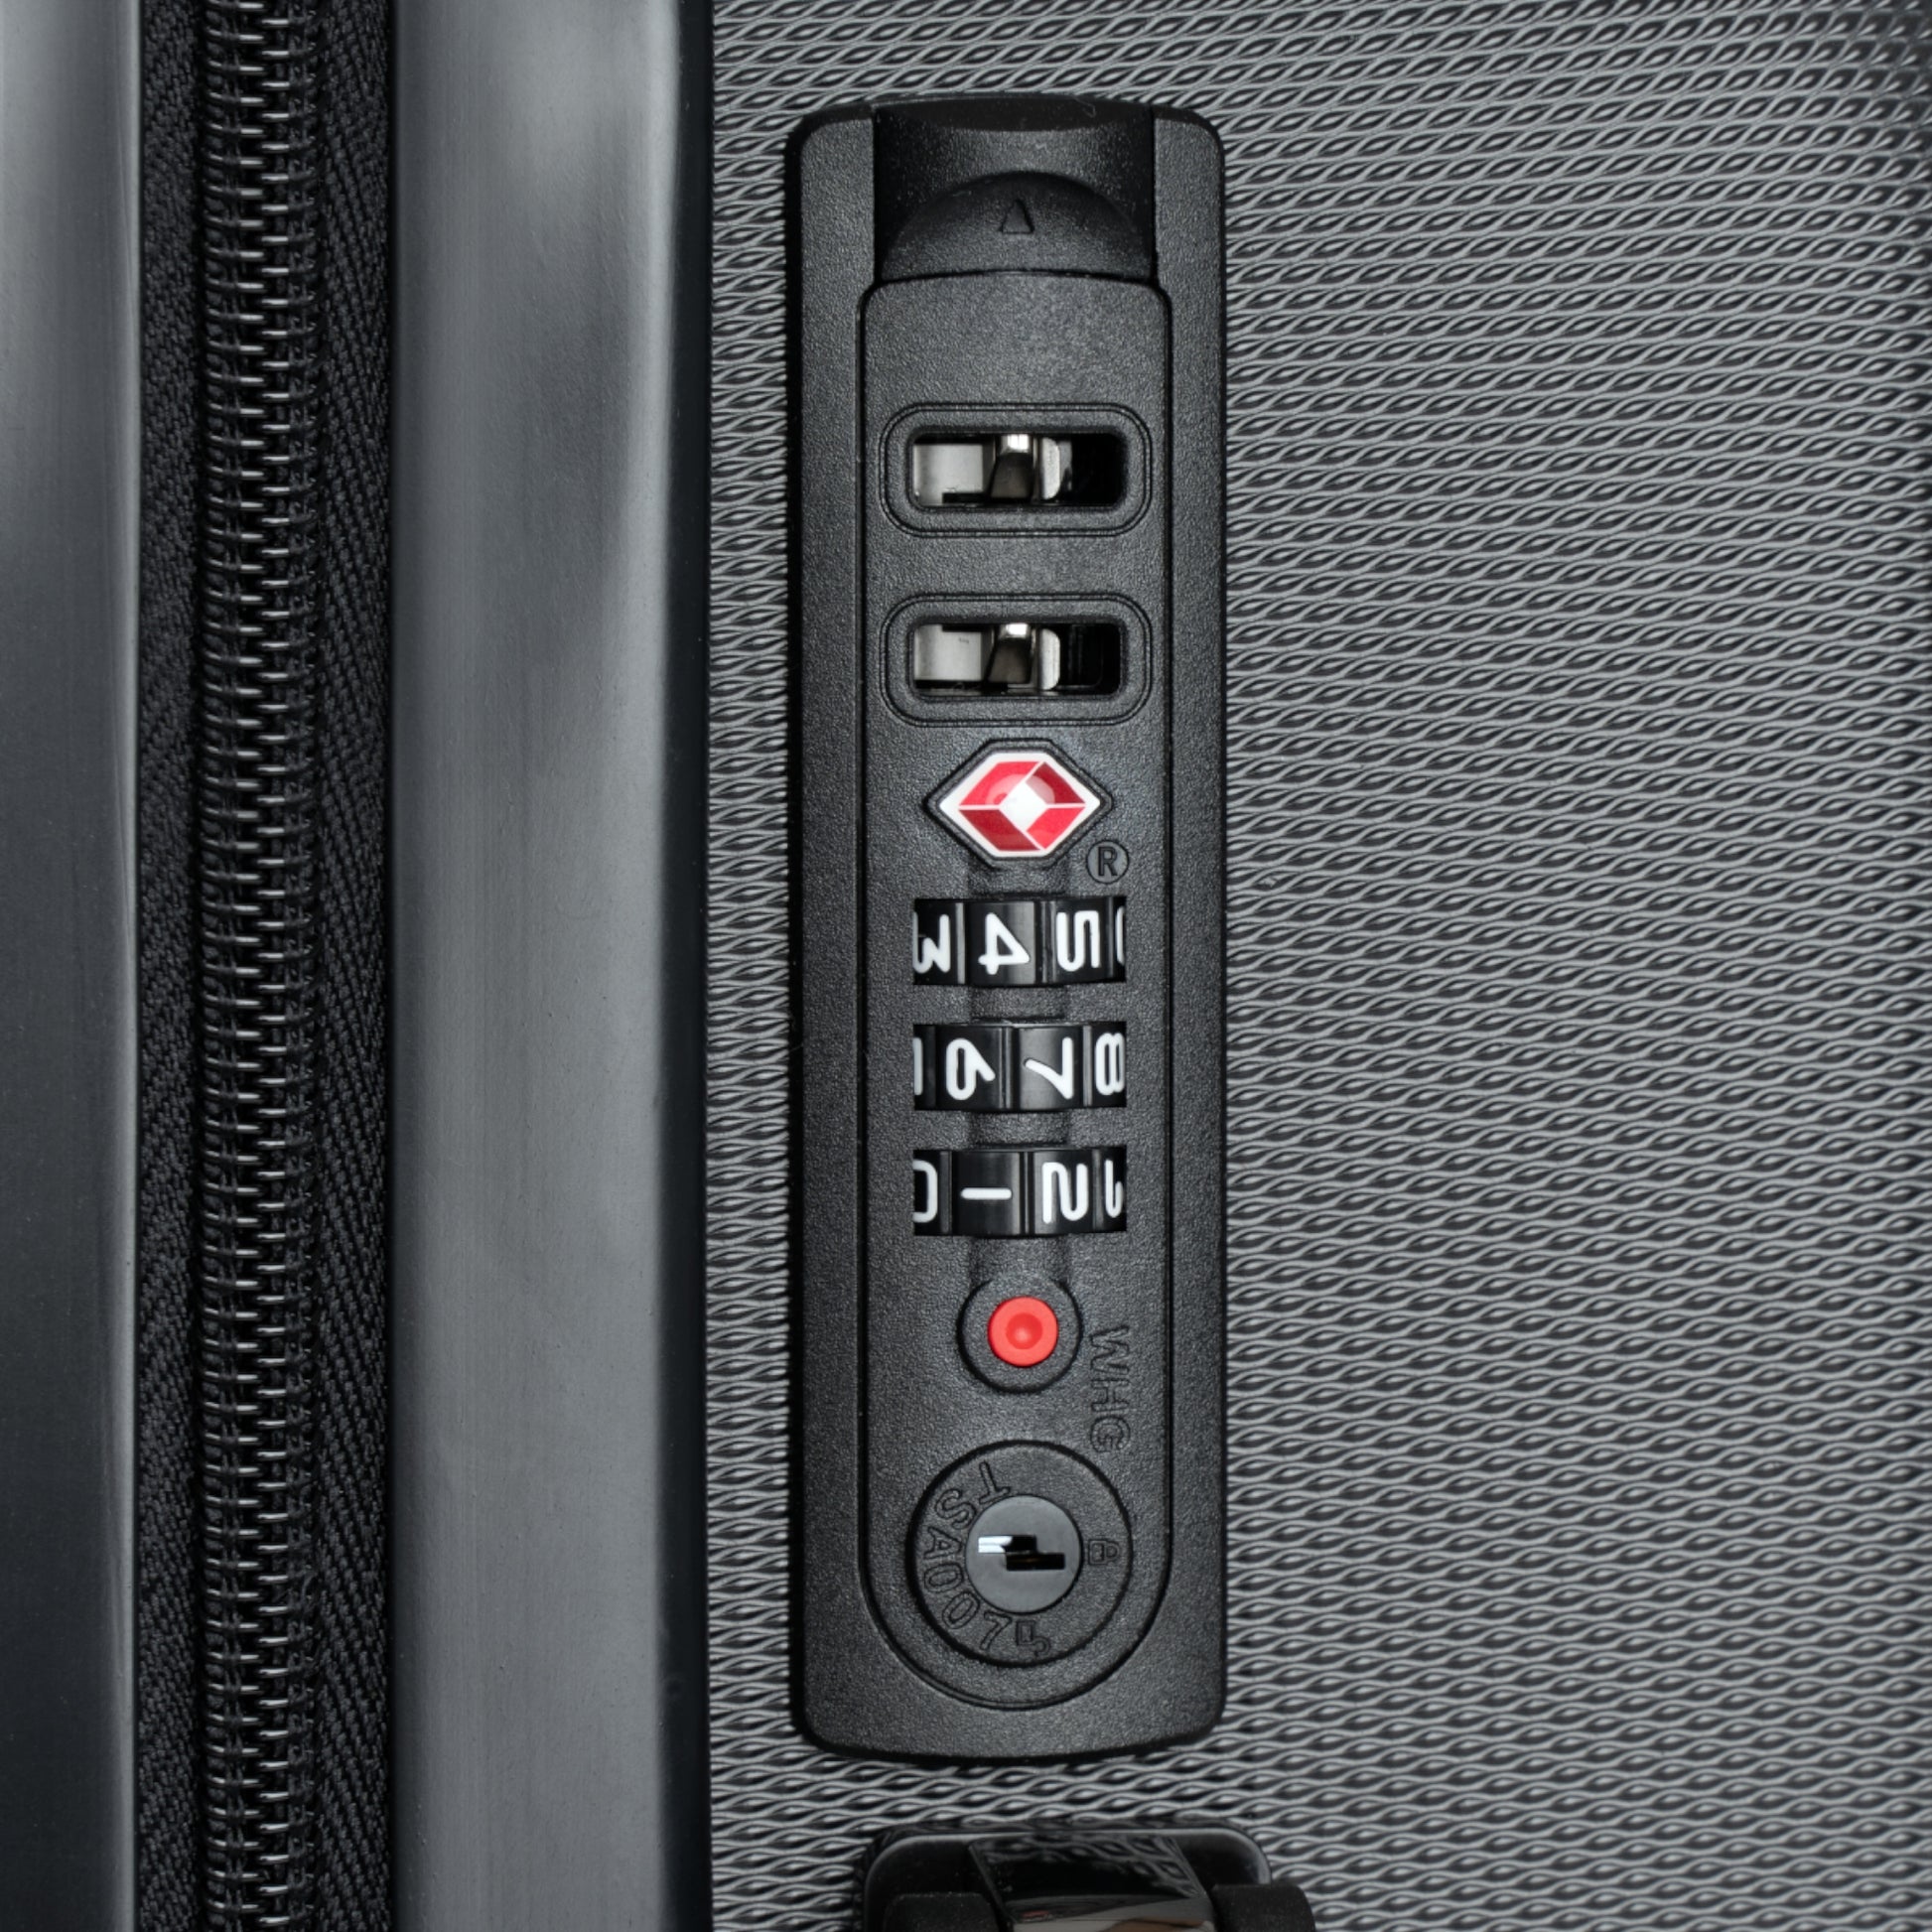 a close up of a remote control on a piece of luggage